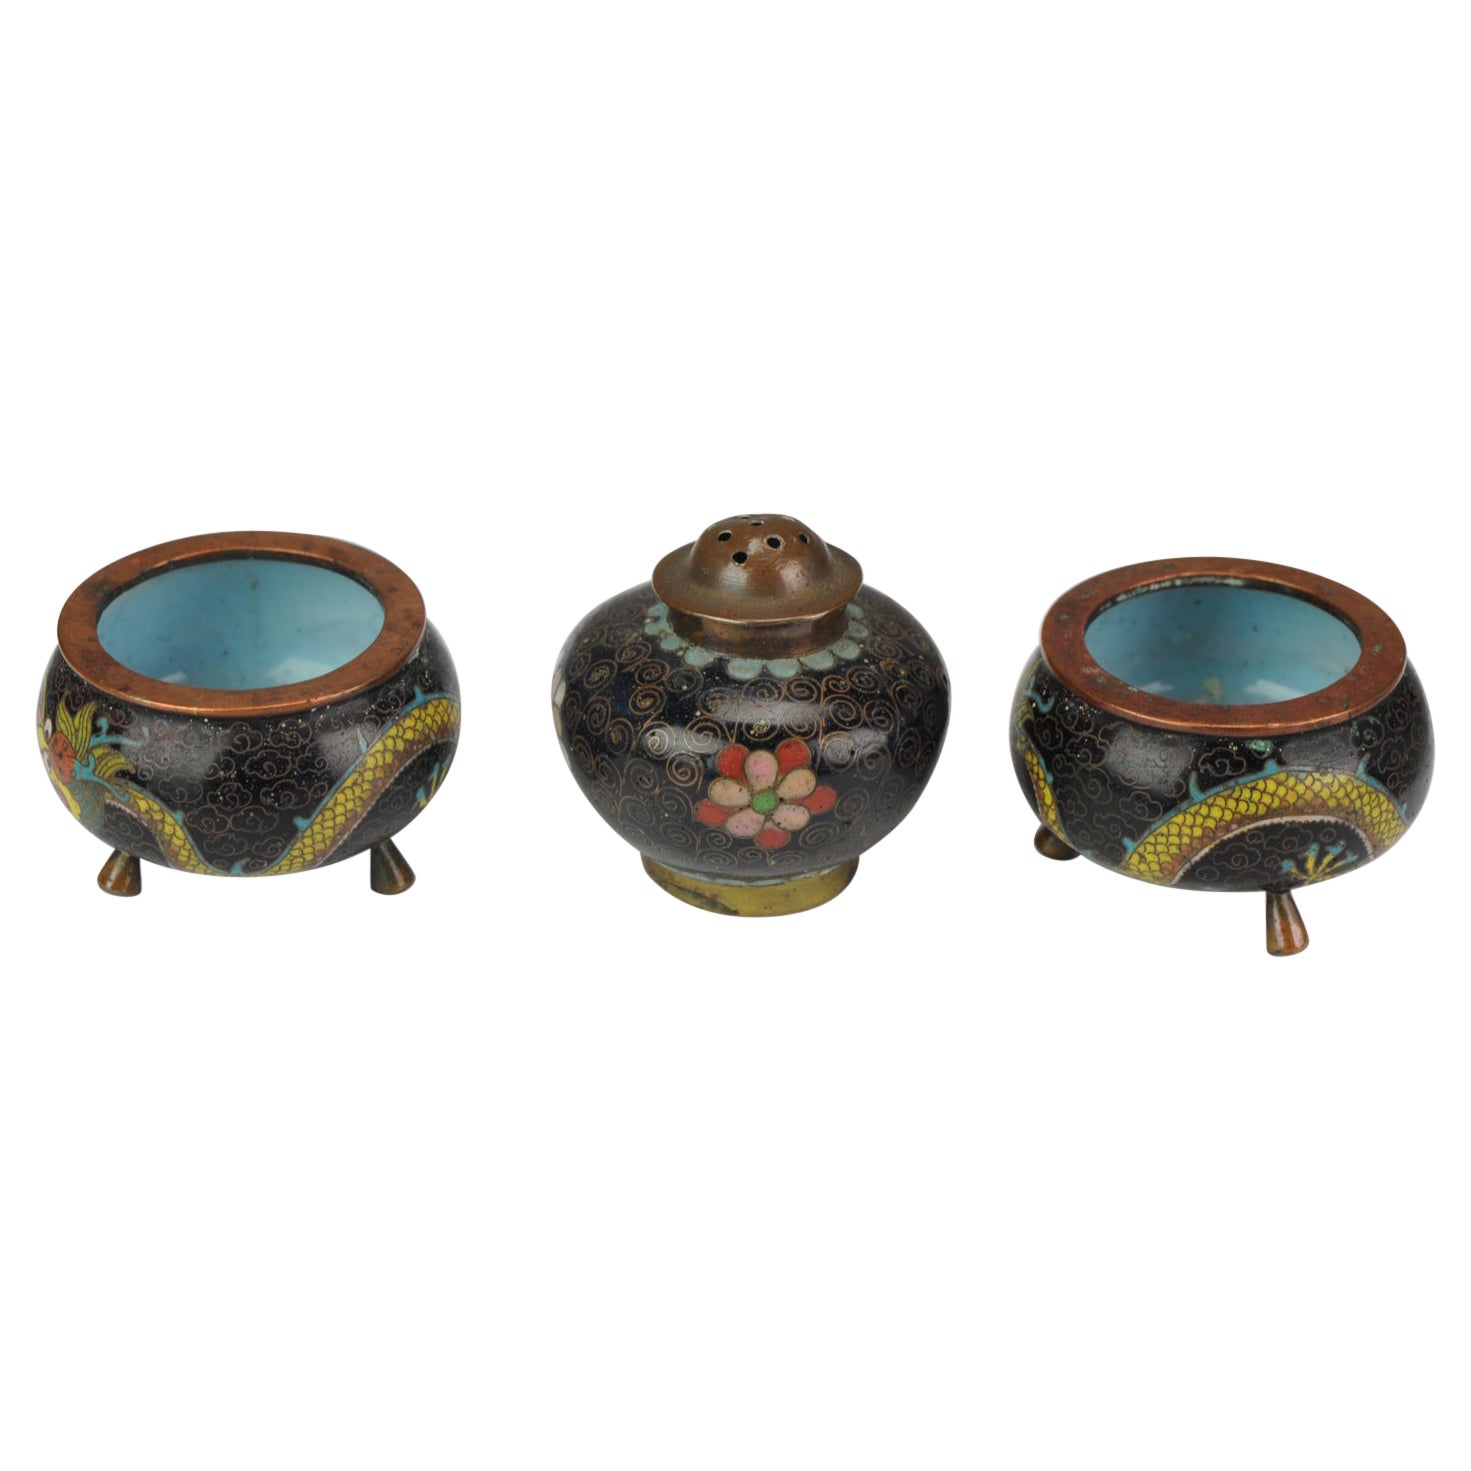 Top Antique Bronze Cloisonné Salt Cellar Tripods China, 19th or Early 20th Cen For Sale